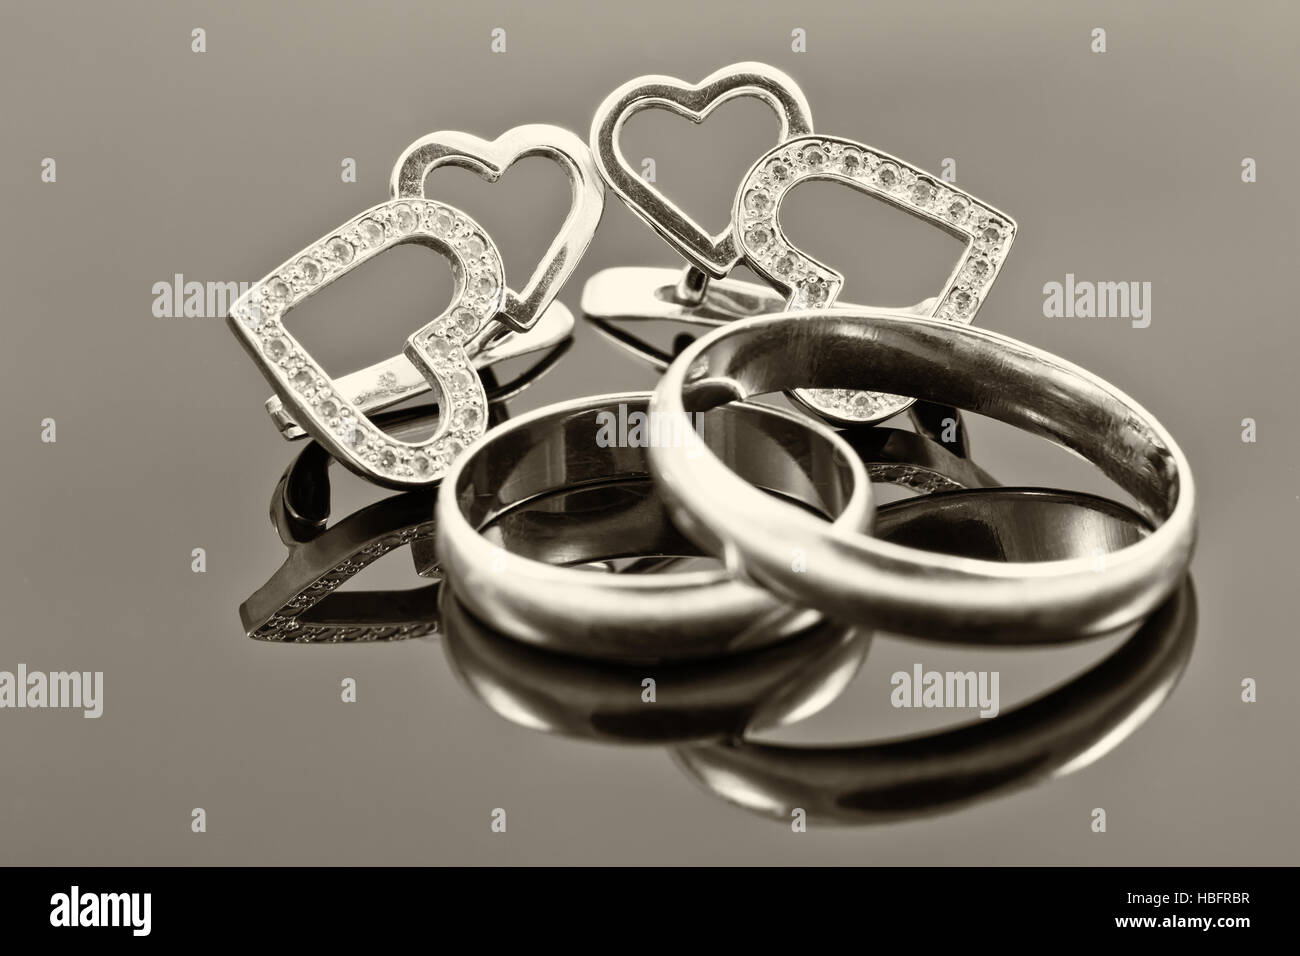 gold wedding rings and earrings Stock Photo